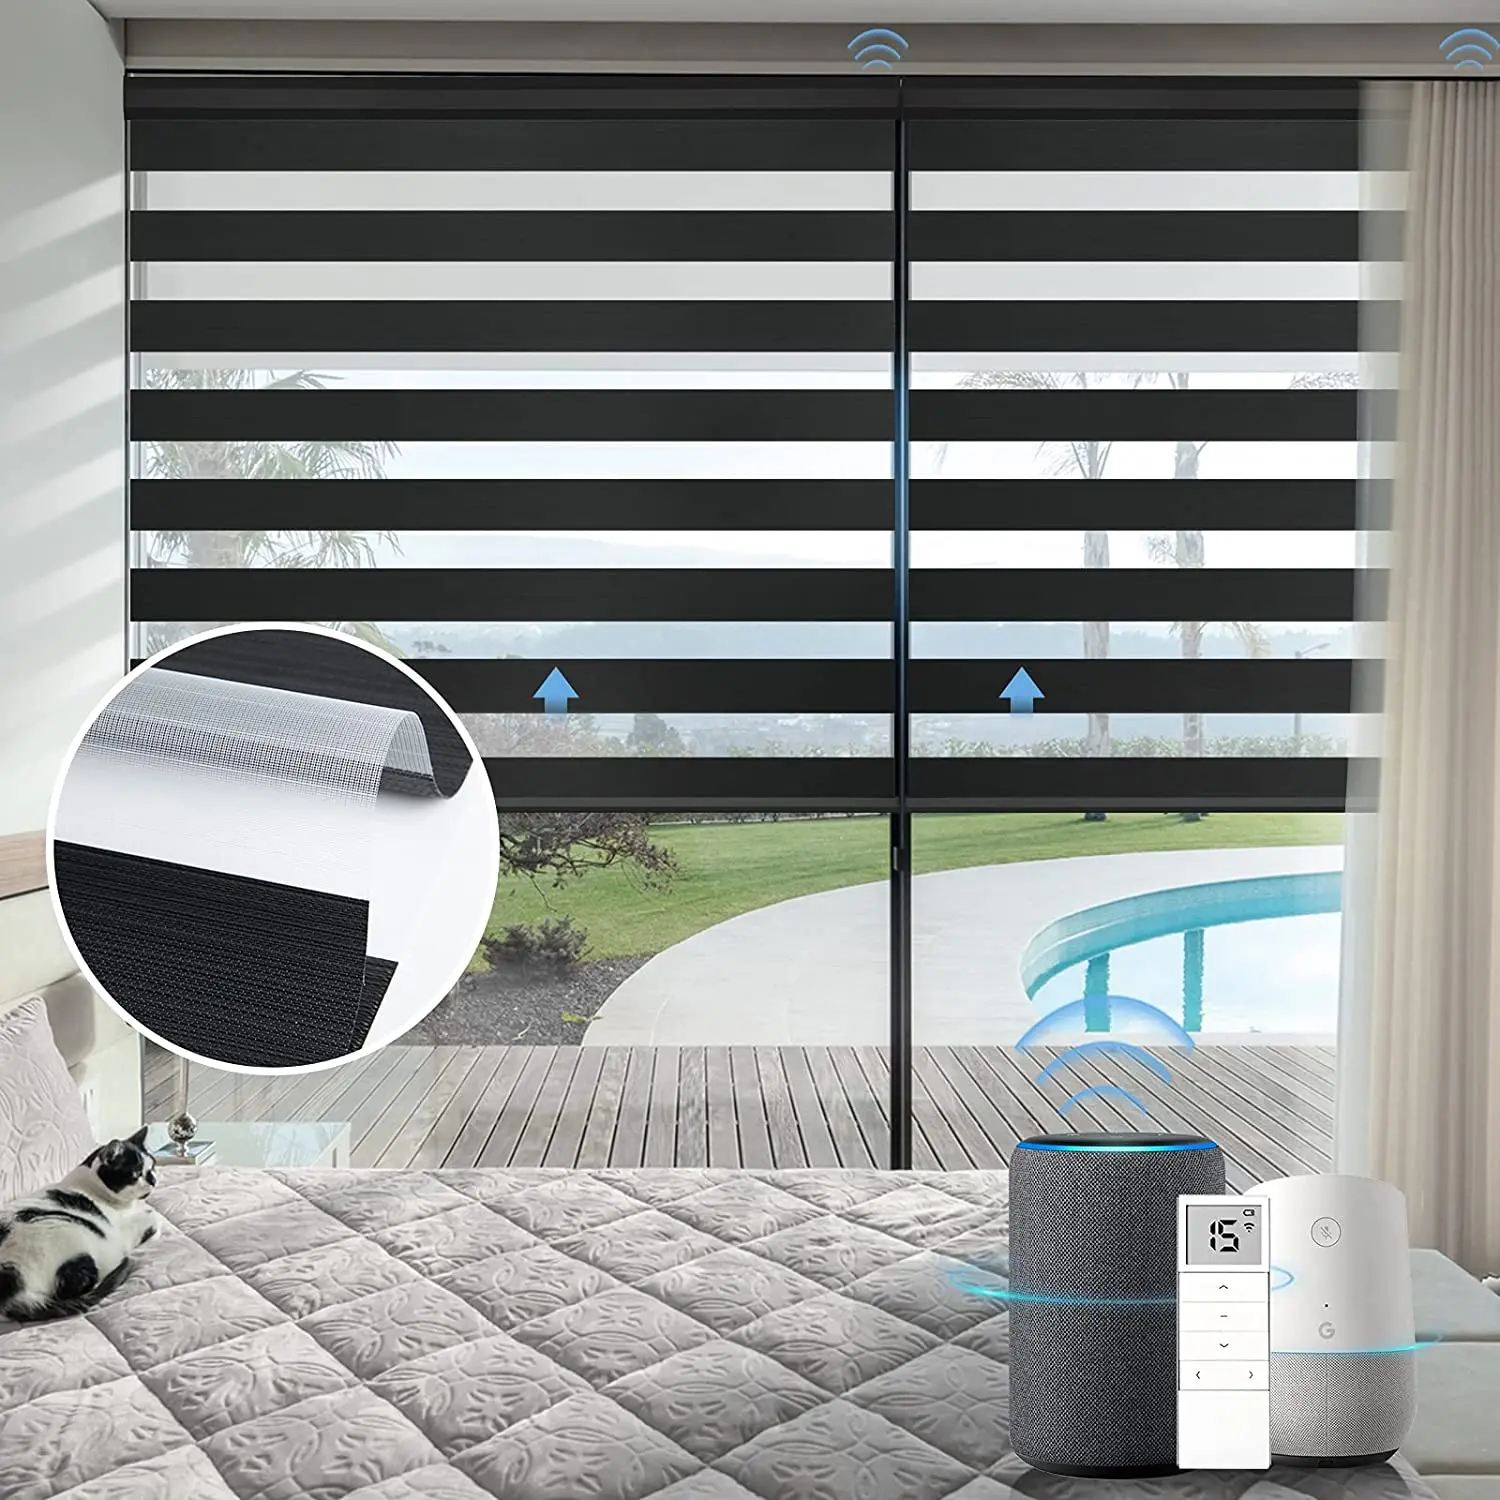 

Blackout Roller Alexa Controlled Battery Operated Wifi Tuya Smart Somfy Automatic Solar Zebra Blinds Motorized For Windows, Customized color